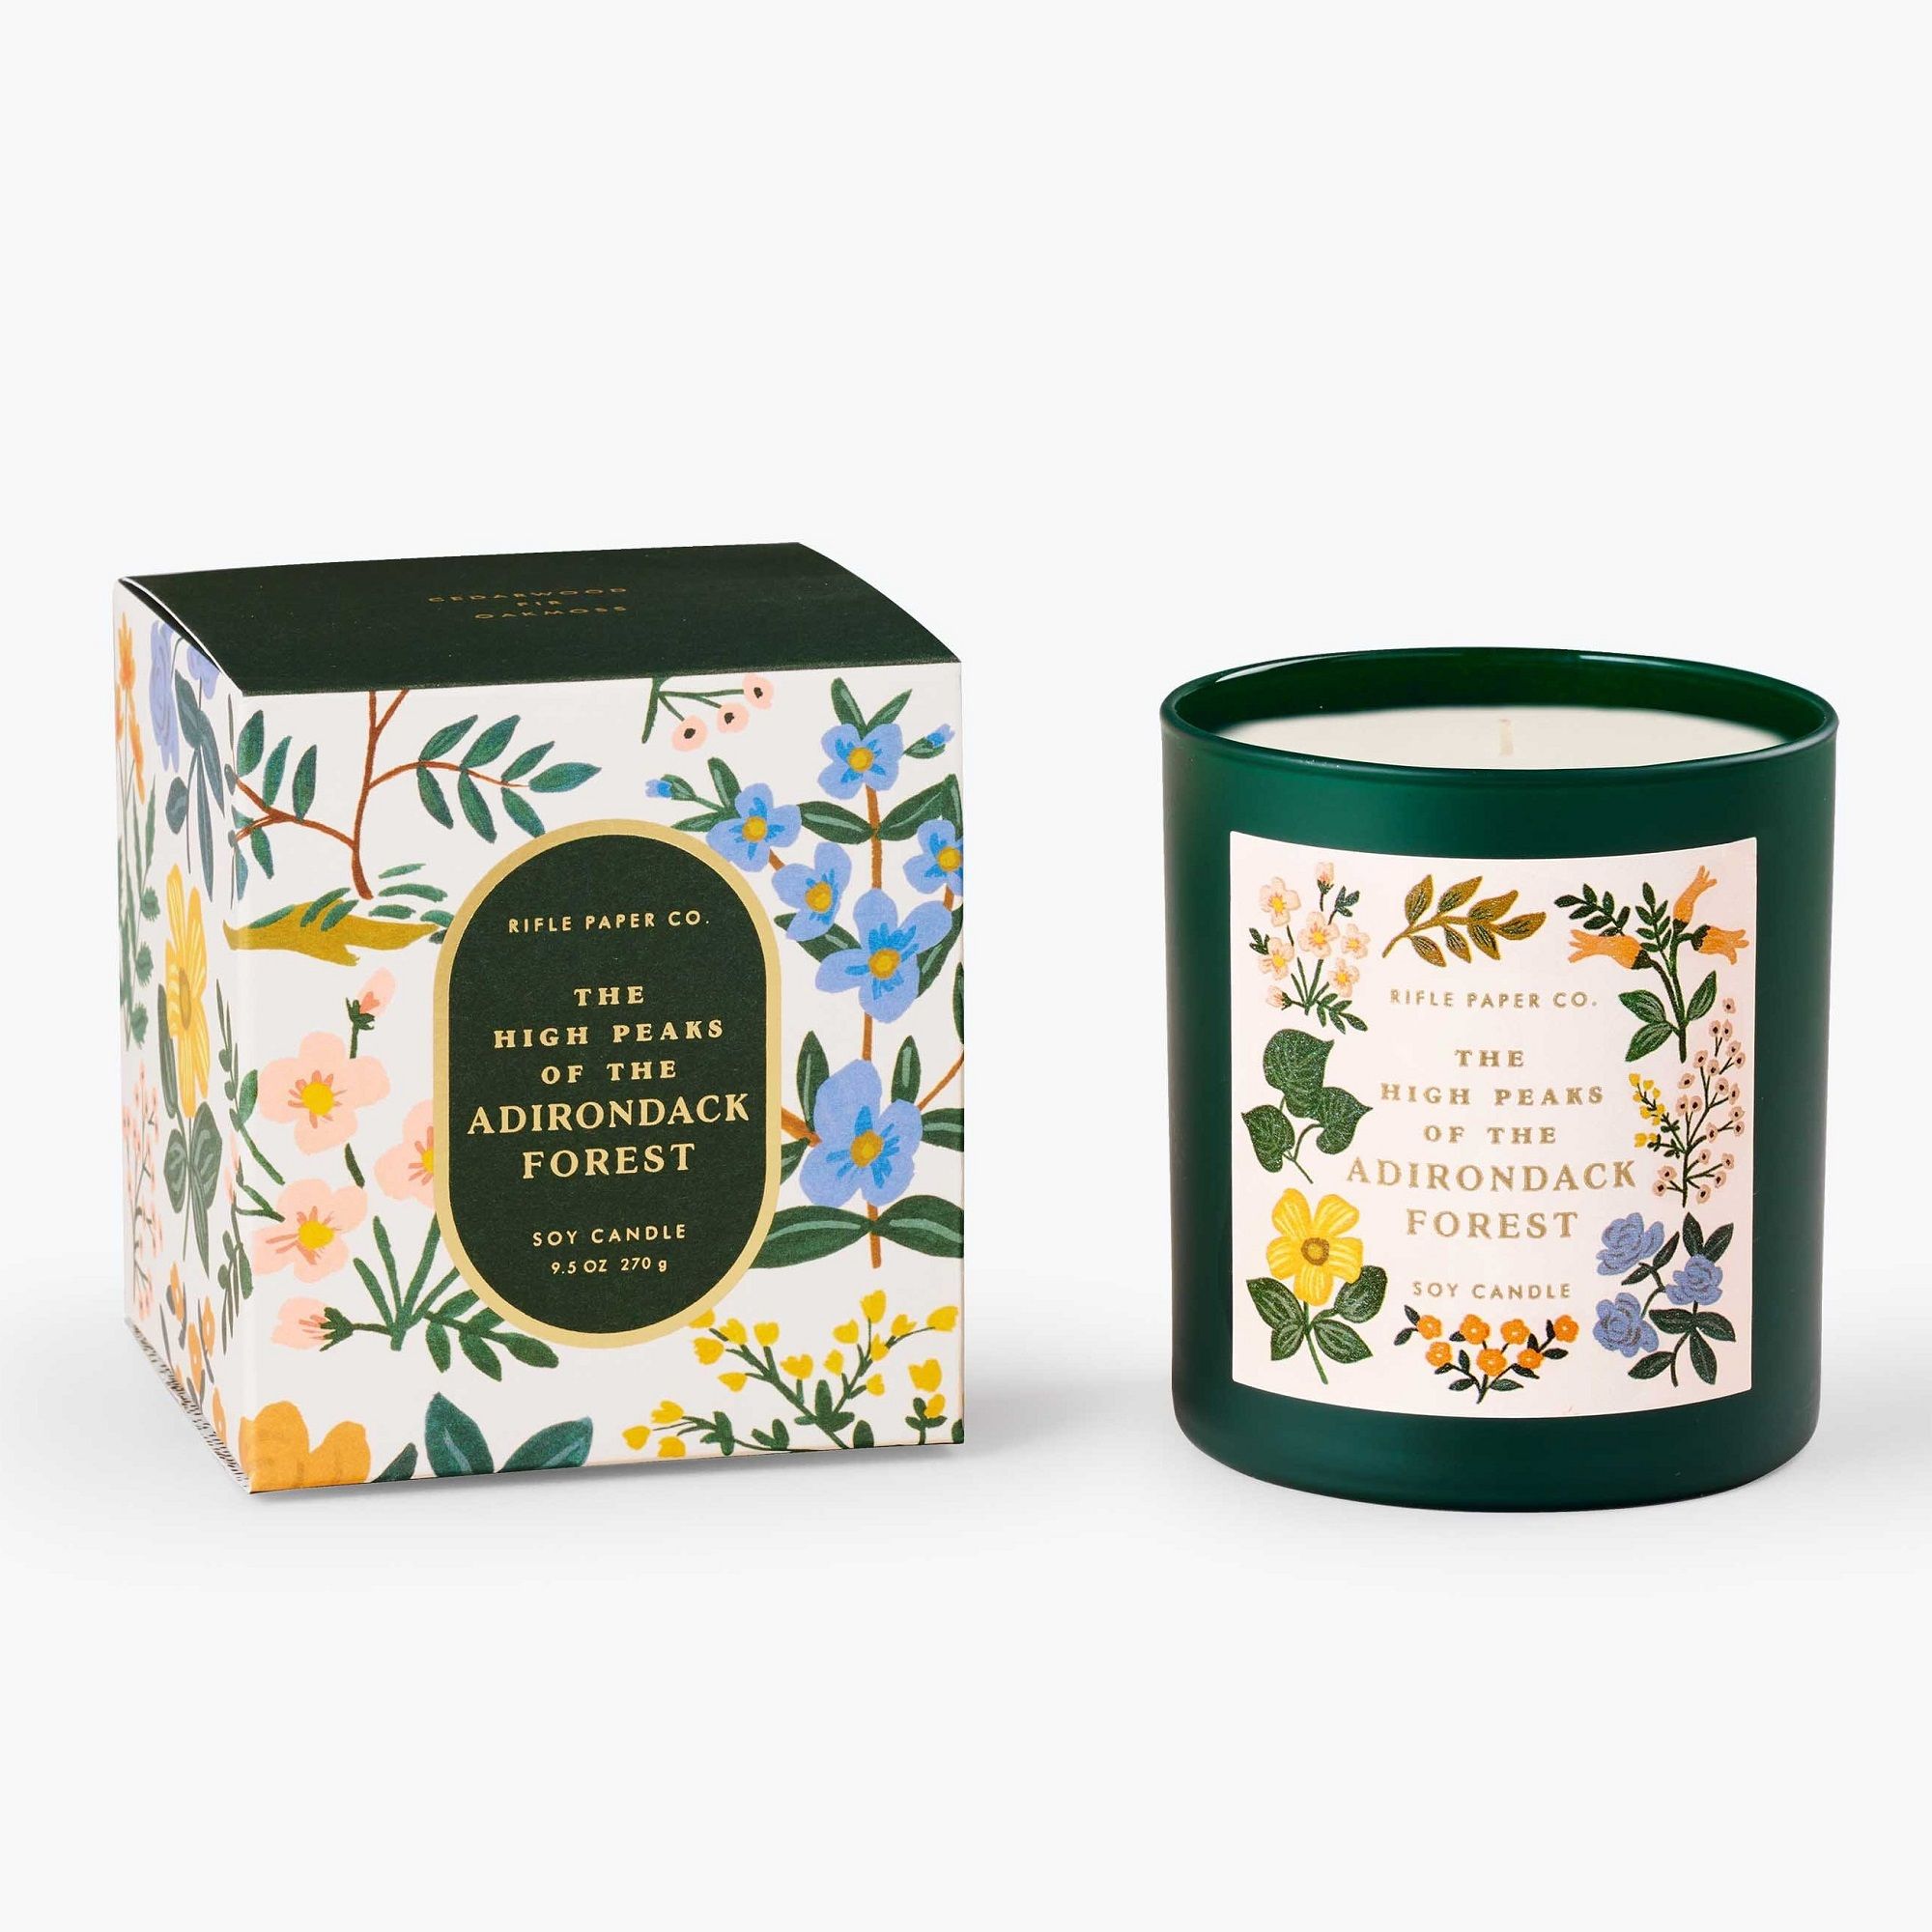 Rifle Paper Co. Candle - High Peaks of the Adirondack Forest